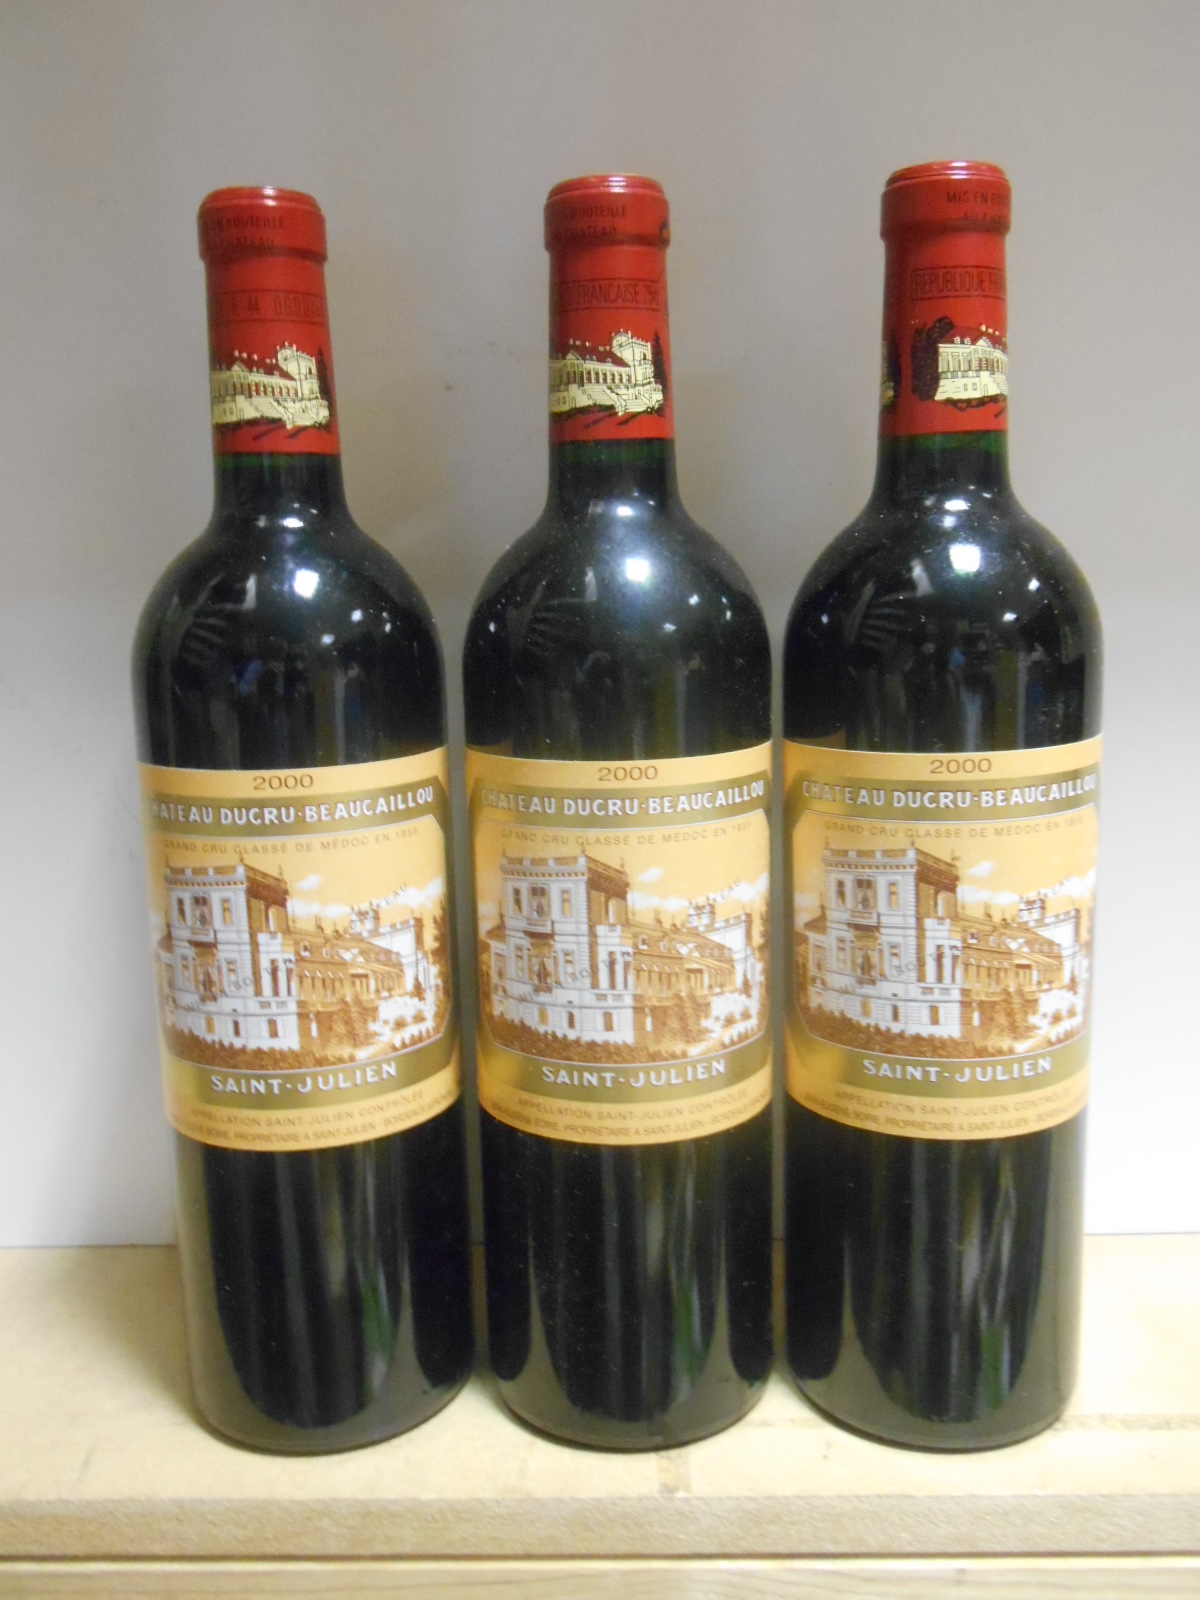 Chateau Ducru-Beaucaillou, St Julien 2eme Cru 2000, six bottles (ex. The Wine Society) - Image 2 of 2